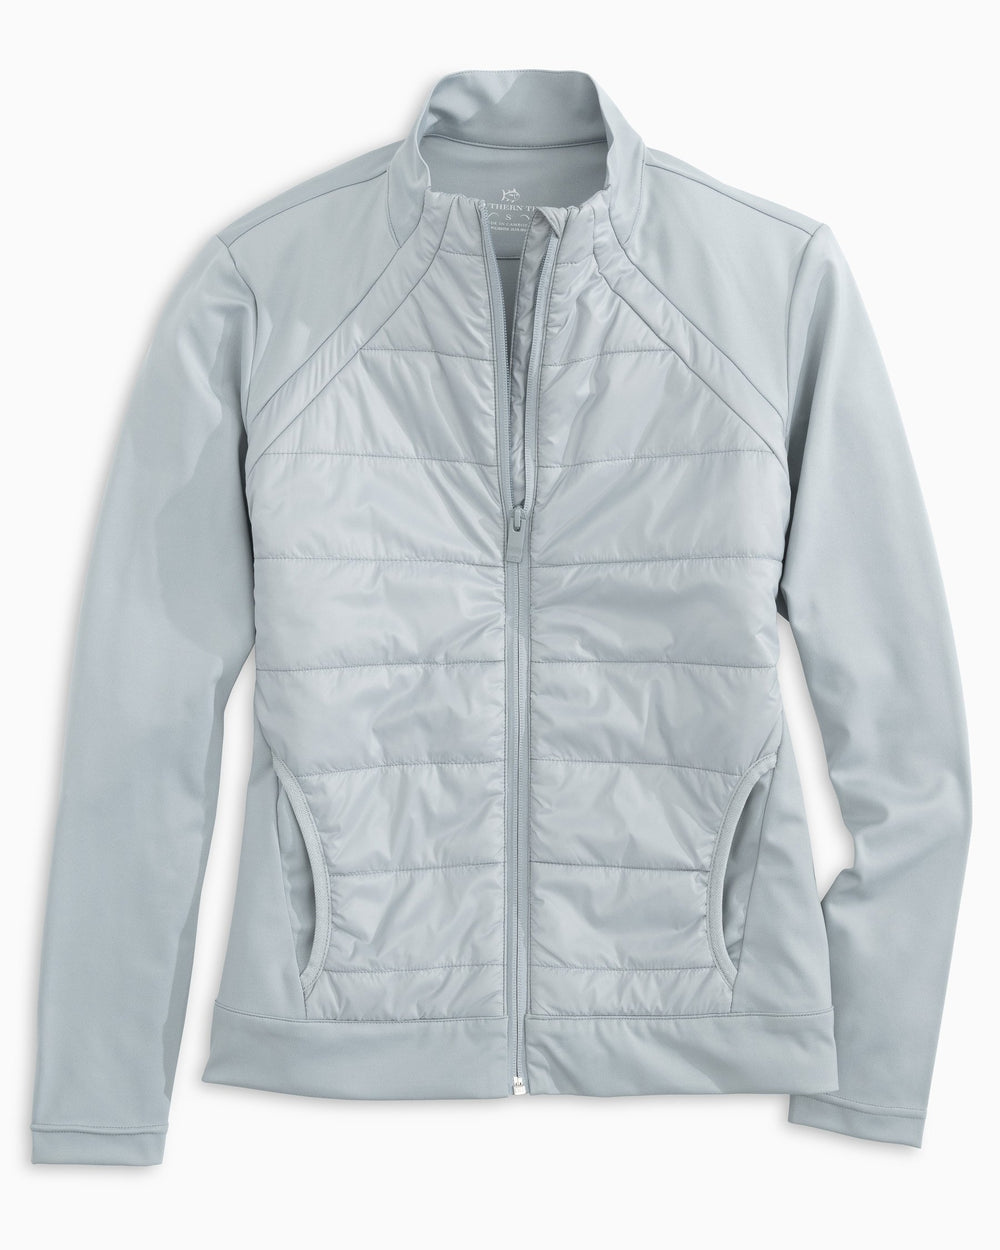 The front of the Women's Josette Mixed Media Full Zip Athletic Jacket - Light Grey